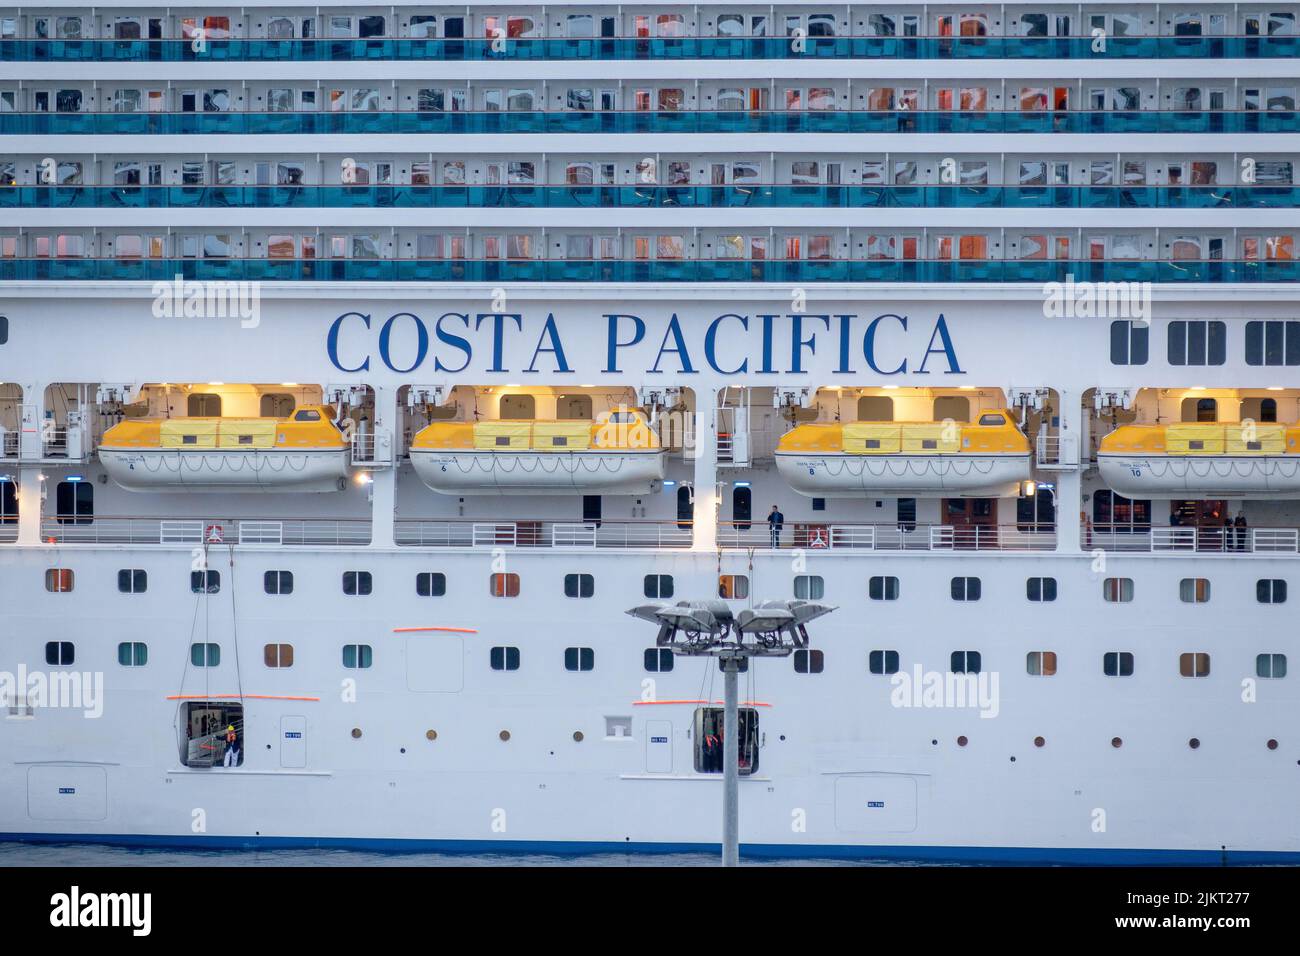 Costa Pacifica Cruise Ship Arriving In Genoa Italy Cruise Port At Dusk Close Up Of Cabins And Costa Cruise Ship Name Stock Photo